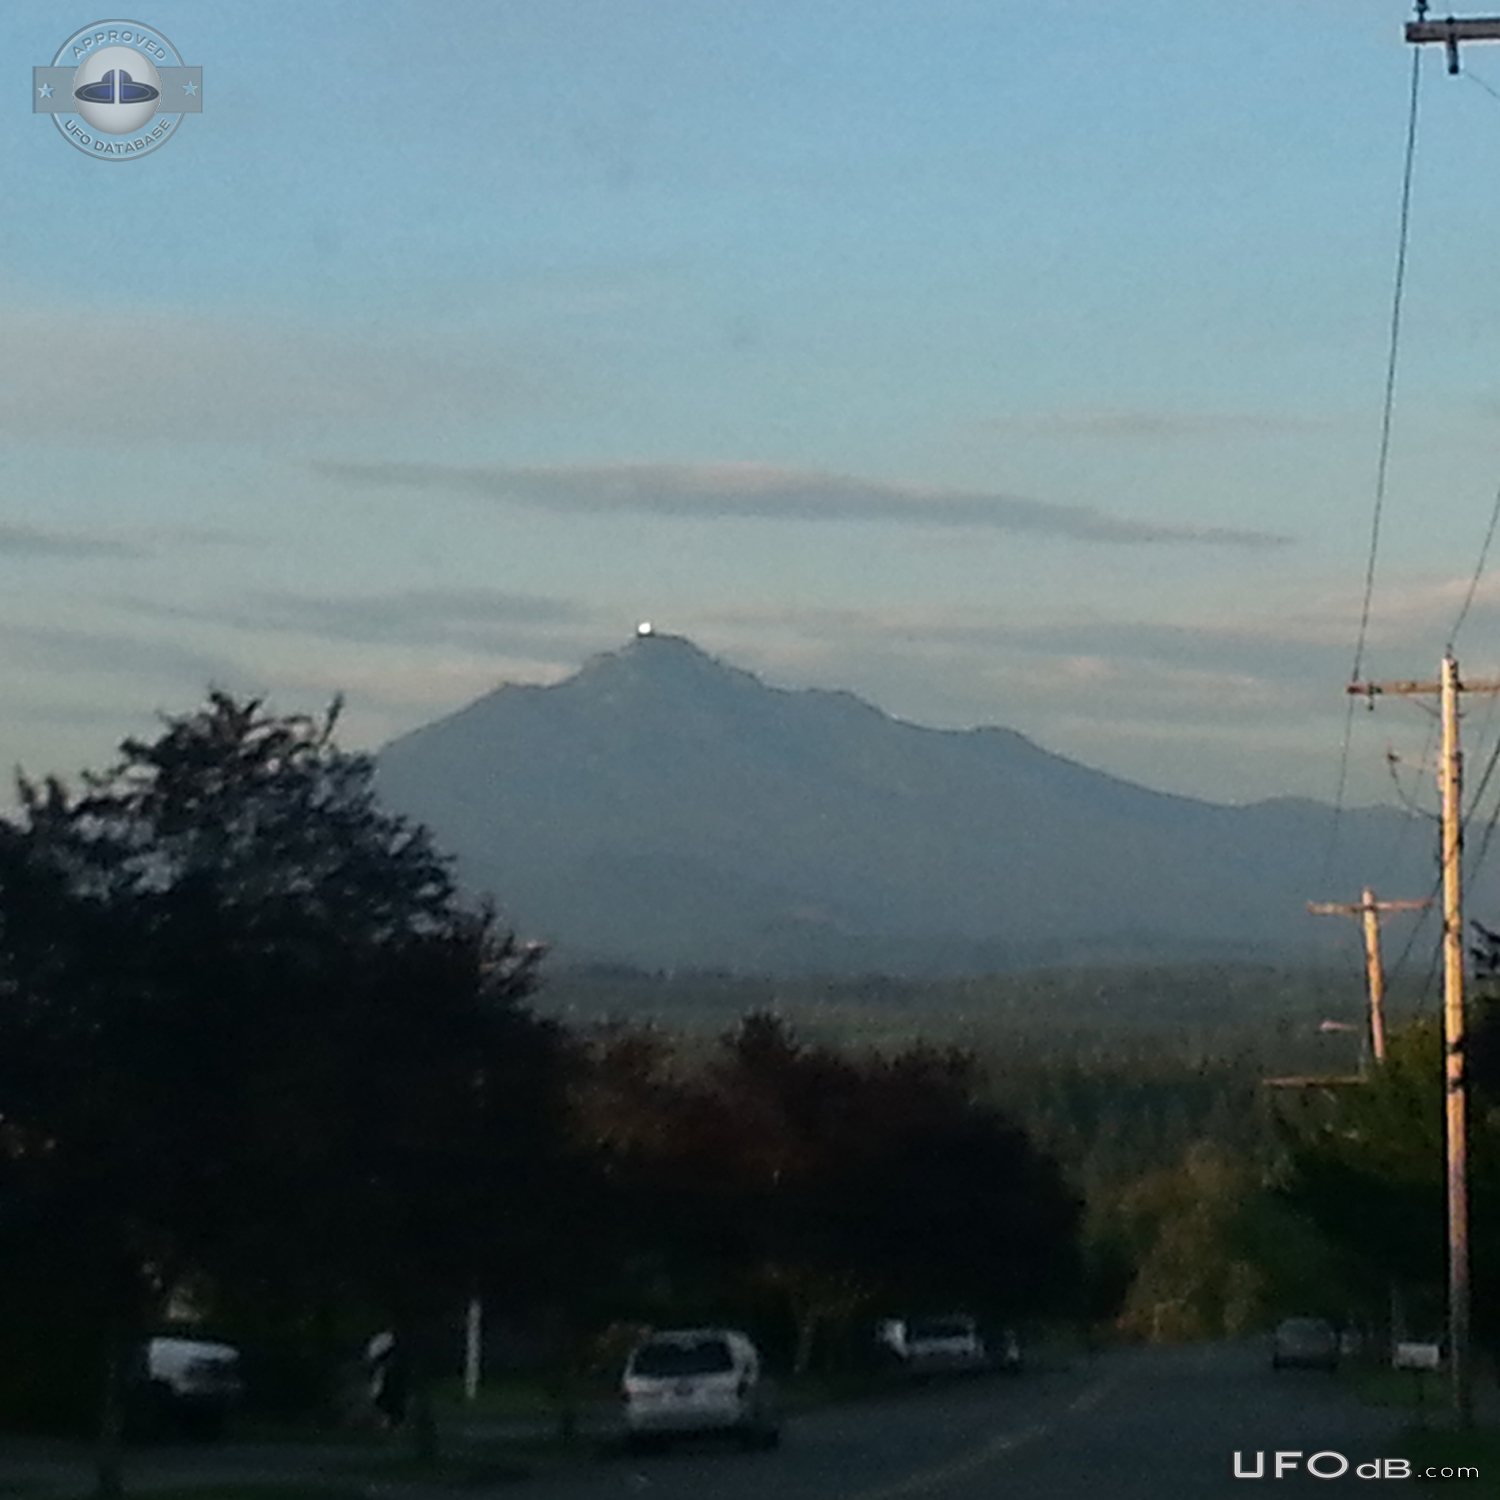 Looked to mountain. saw gigantic hovering ufo - Lake Stevens USA 2015 UFO Picture #703-2